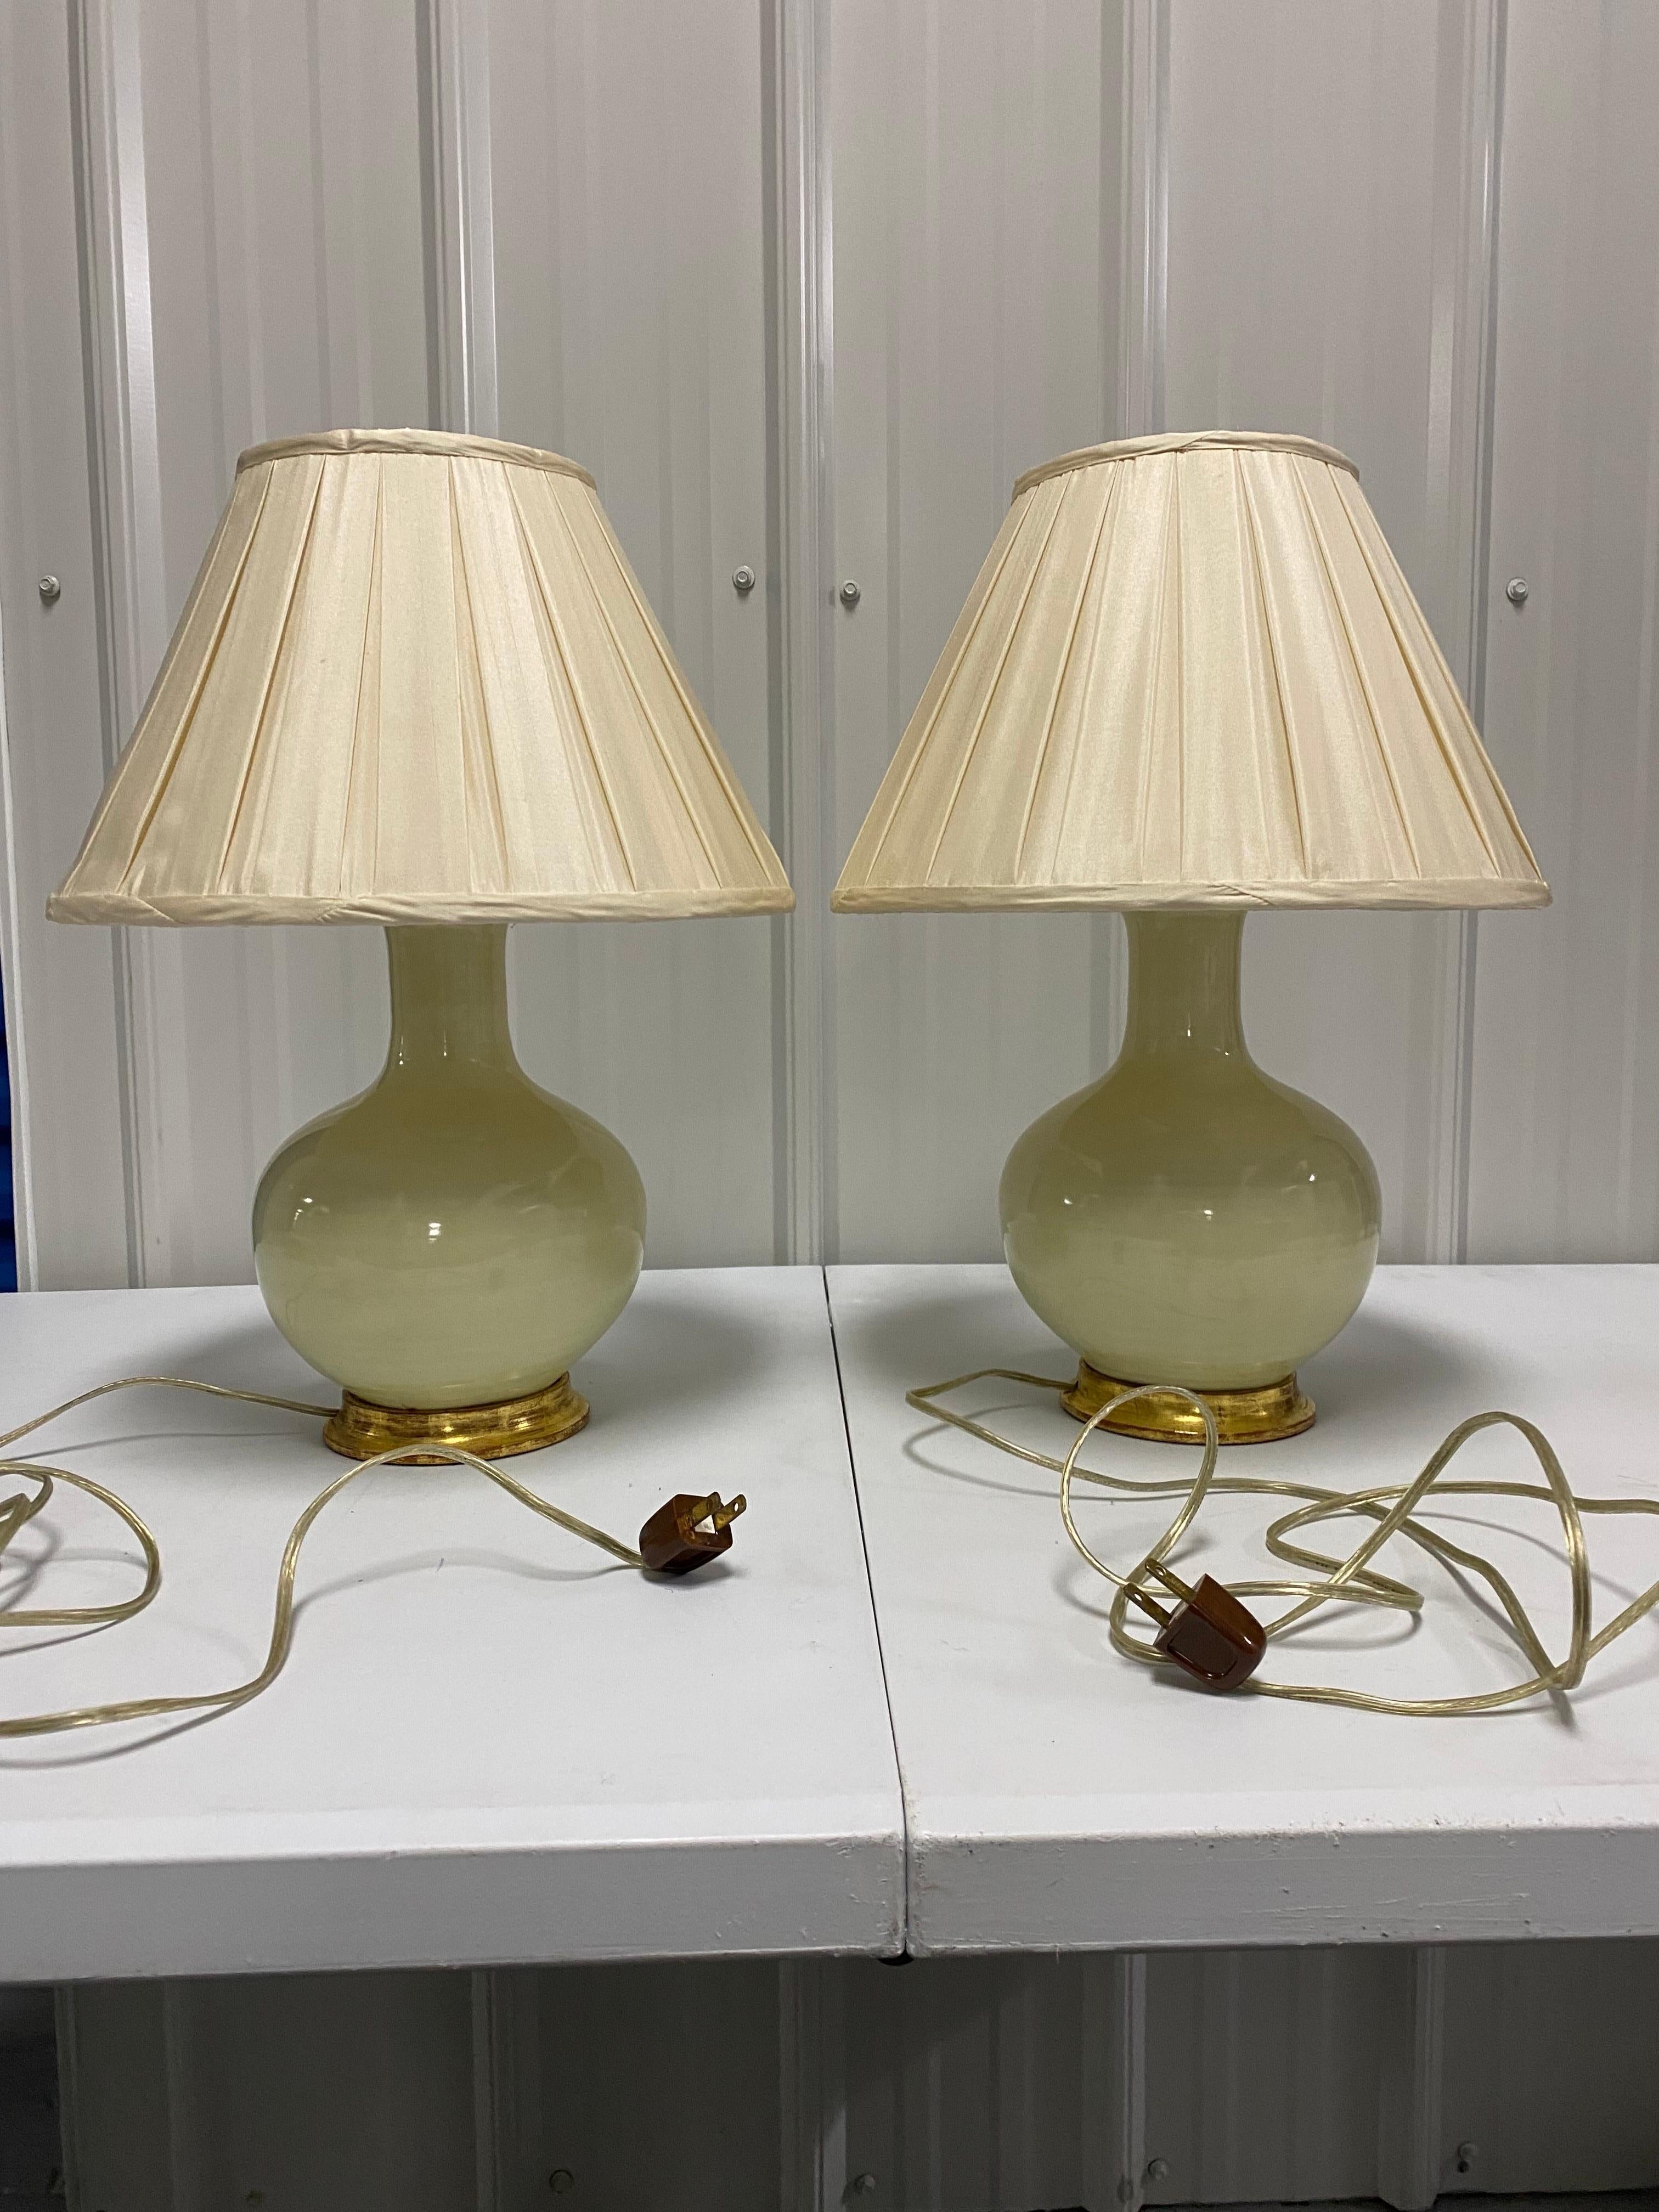 Gilt Pair of Lindsay Lamps in Sesame by Christopher Spitzmiller For Sale